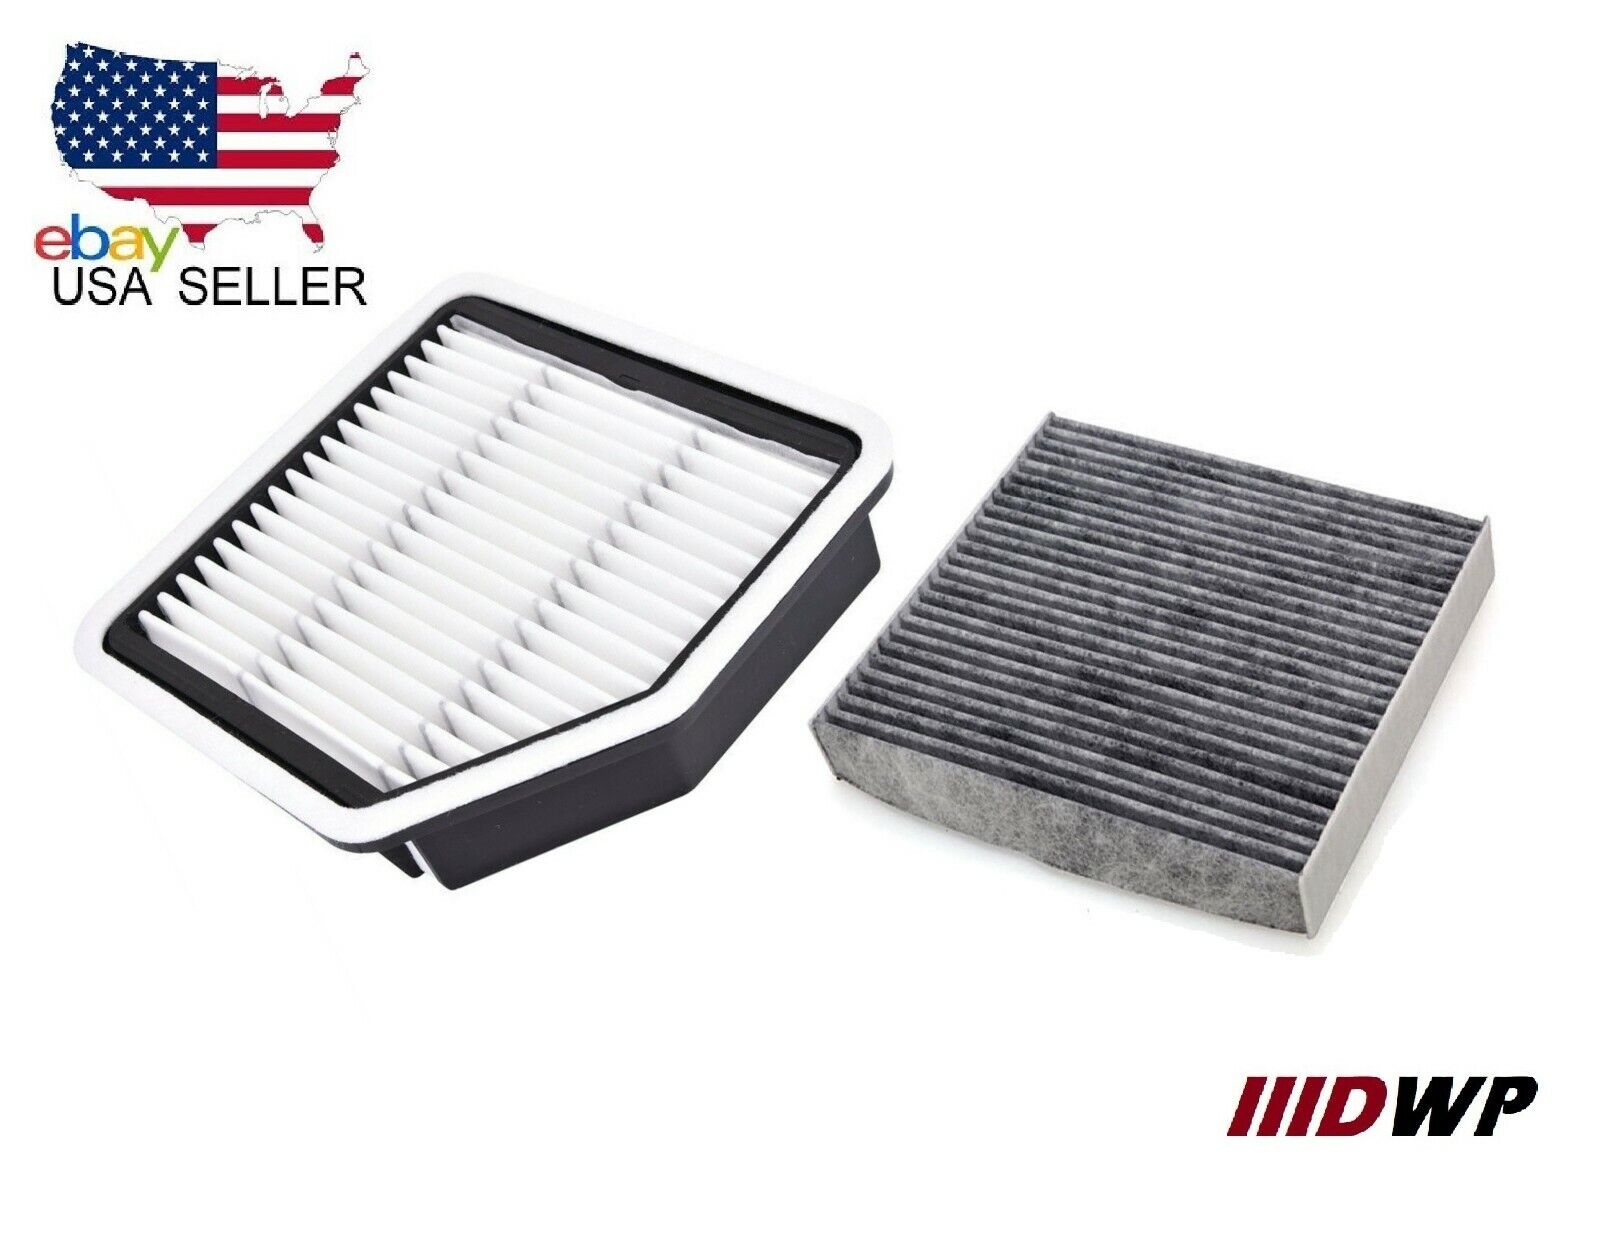 ENGINE AIR FILTER +CHARCOAL CABIN FILTER FOR 2006-2013 IS250 IS350 2007-11 GS350